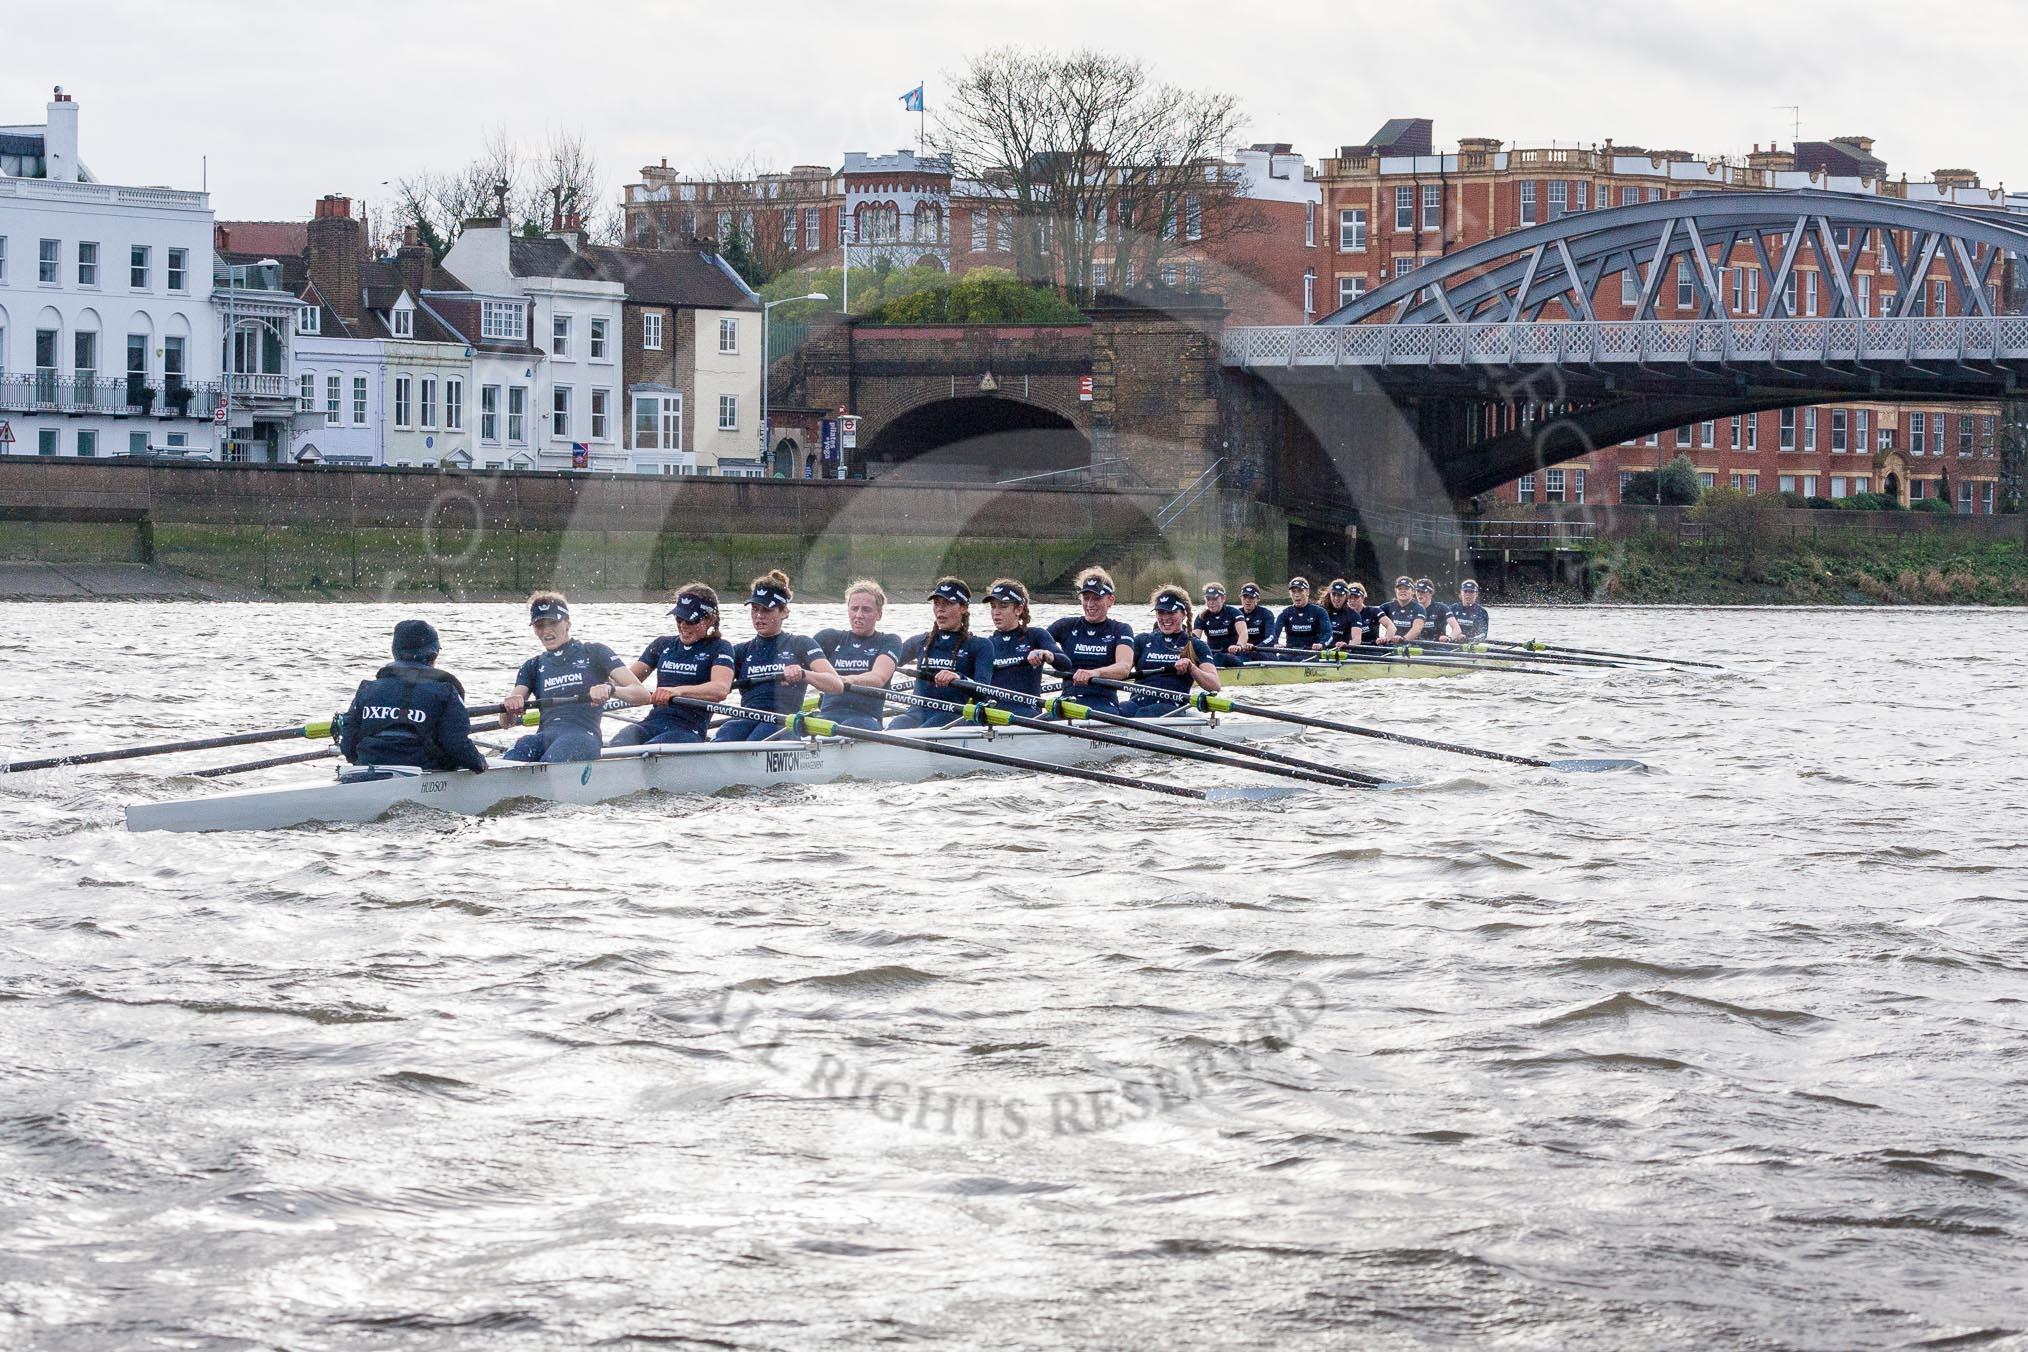 The Boat Race season 2016 - Women's Boat Race Trial Eights (OUWBC, Oxford): "Scylla" and "Charybdis" approaching Barnes Railway Bridge, with "Charybdis" in the lead.
River Thames between Putney Bridge and Mortlake,
London SW15,

United Kingdom,
on 10 December 2015 at 12:34, image #288